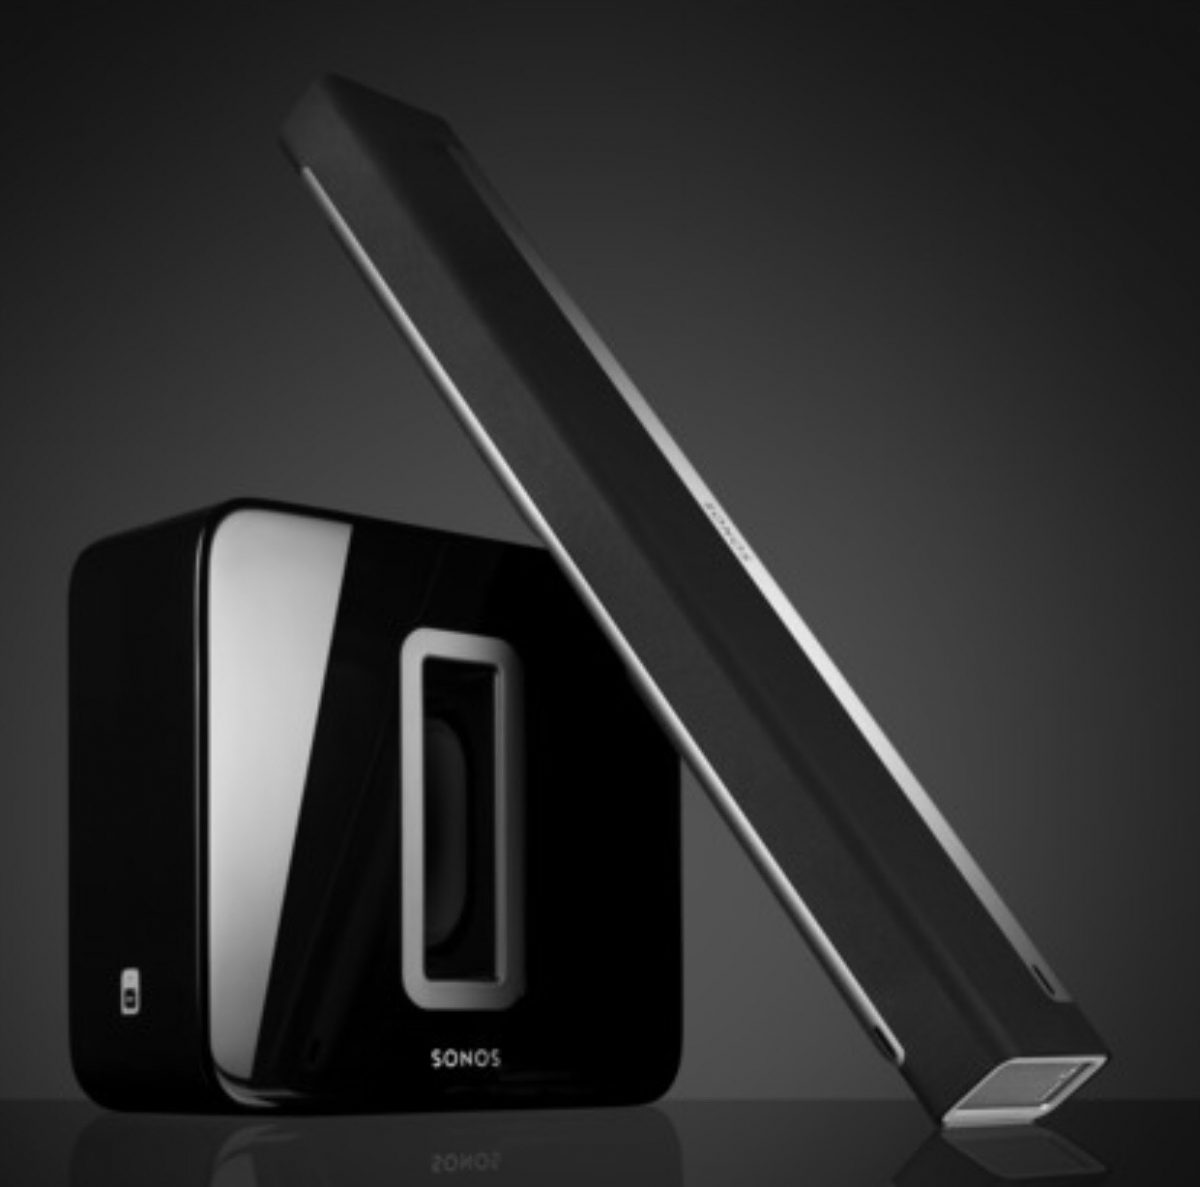 Sonos Software Update 5.2 Is Public Beta Awesomeness